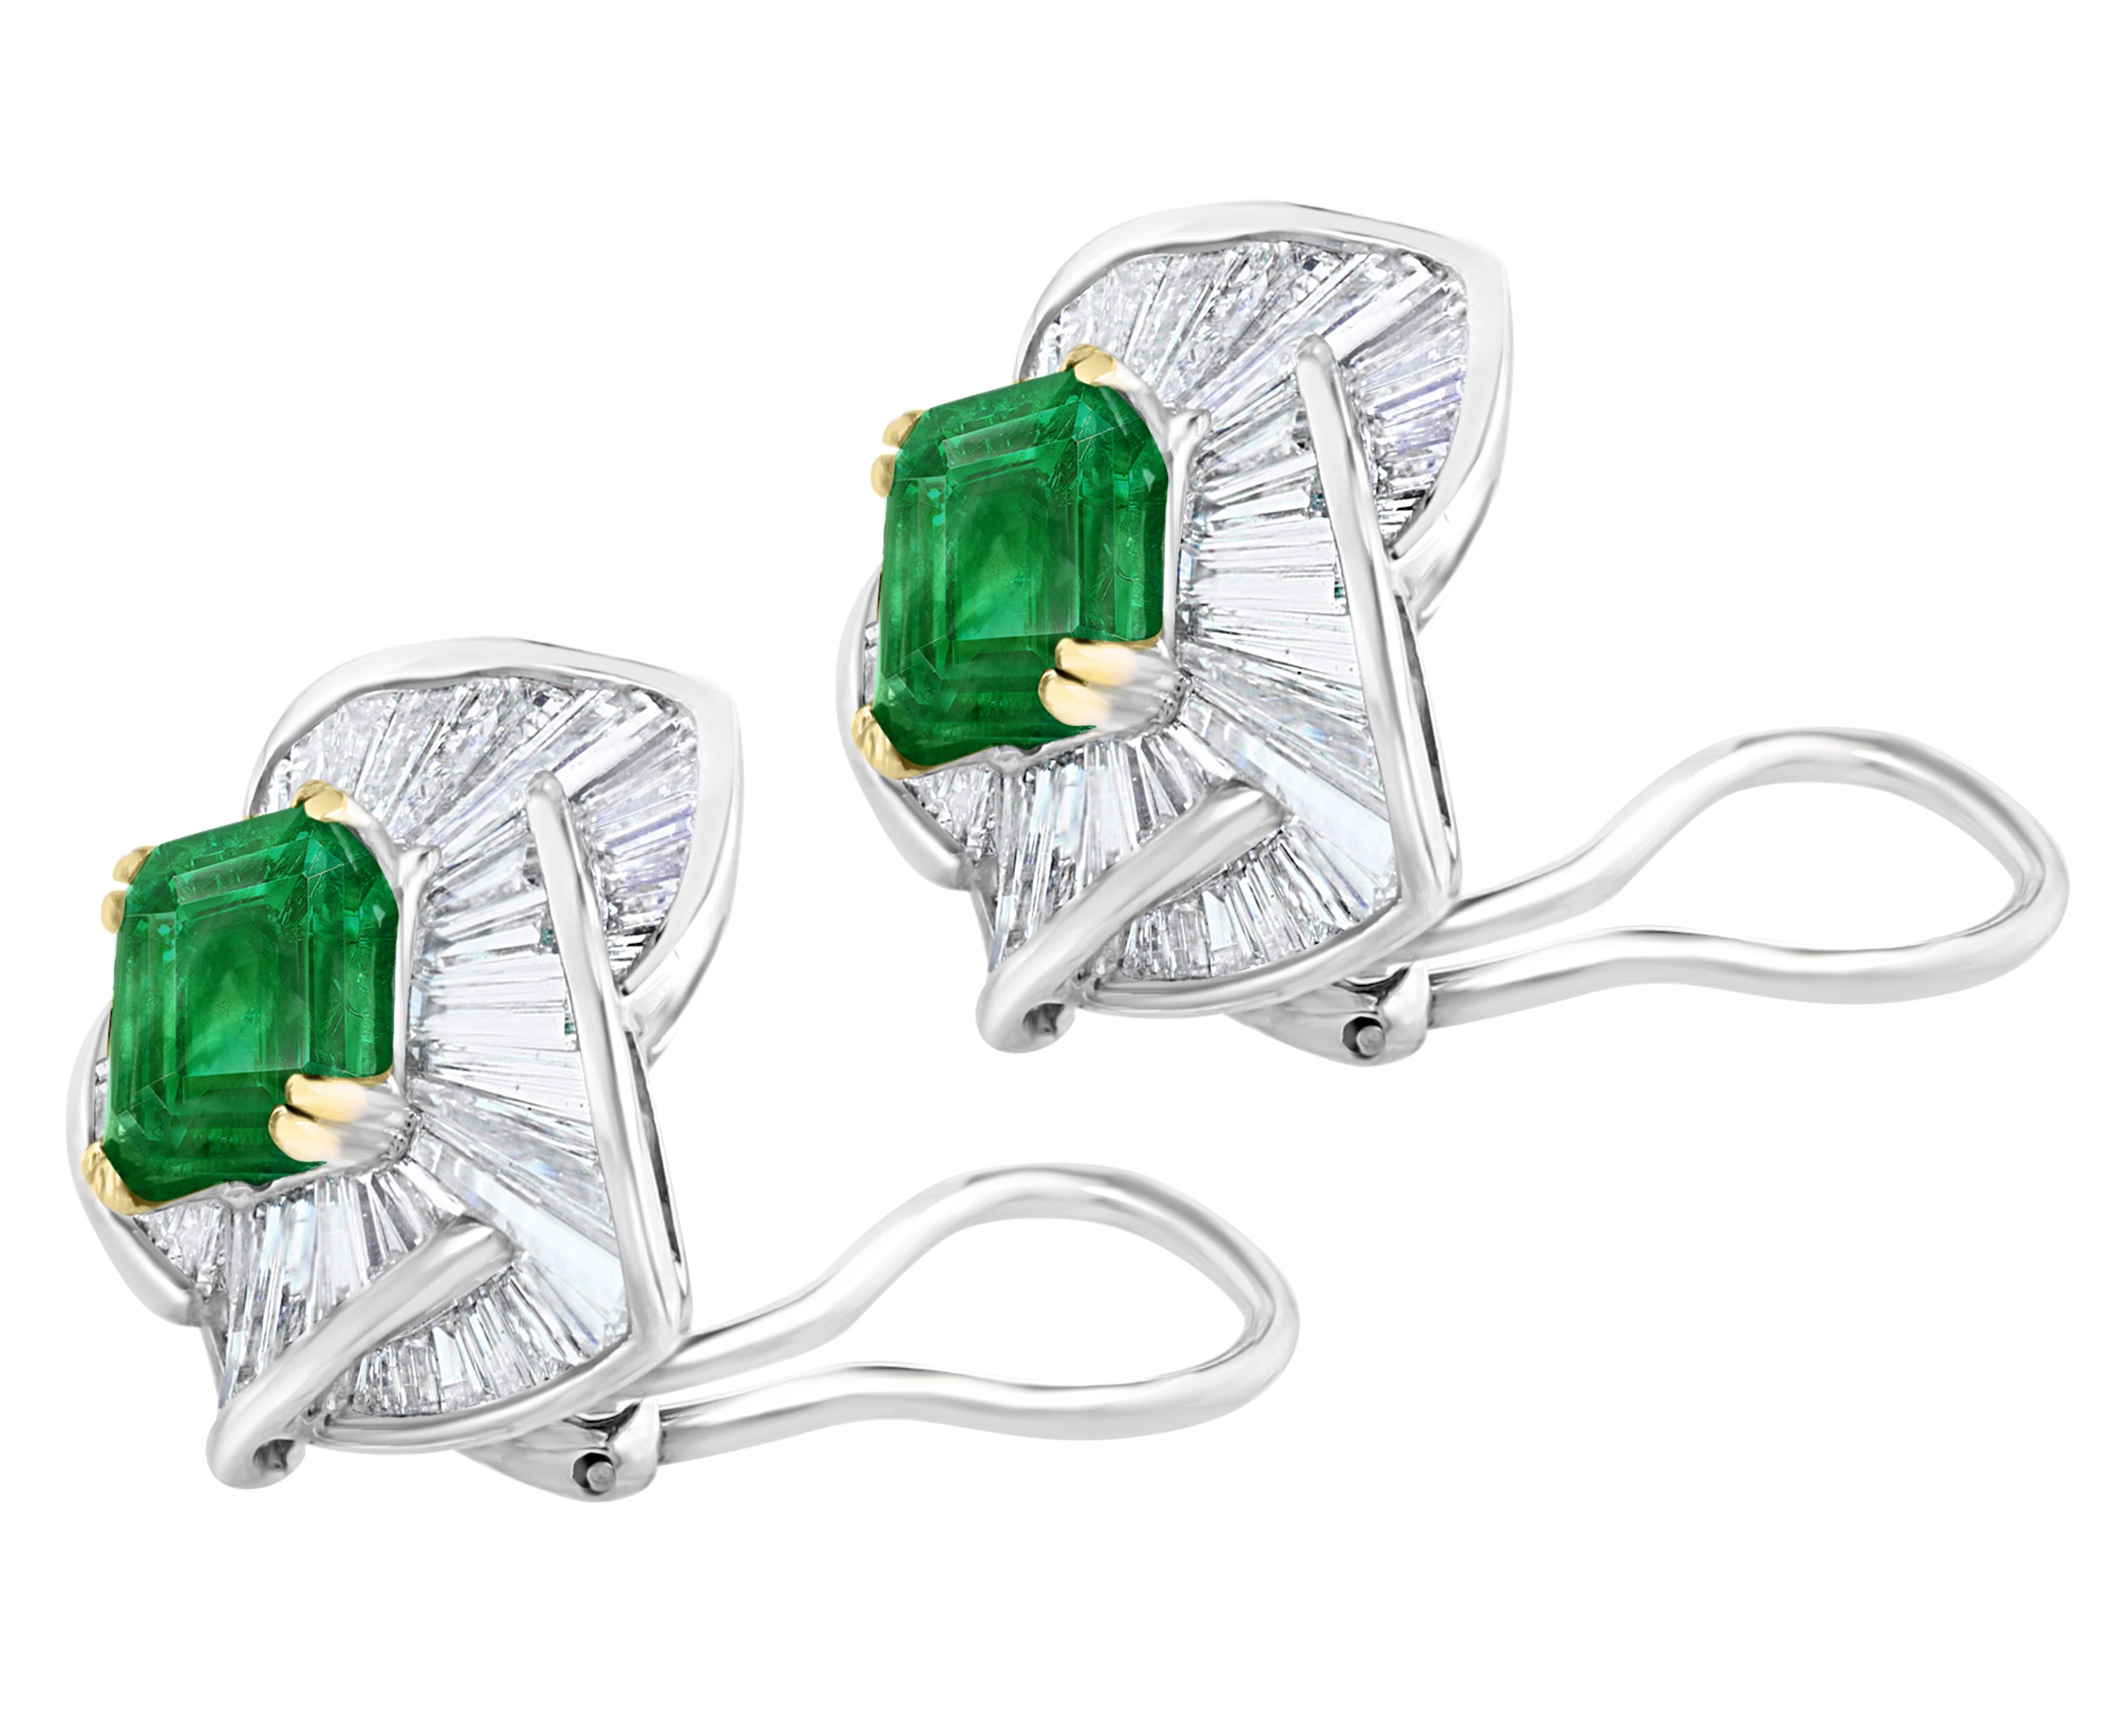 AGL Certified Minor 4ct Emerald Cut Colombian Emerald Diamond Earrings 18k Gold In Excellent Condition For Sale In New York, NY